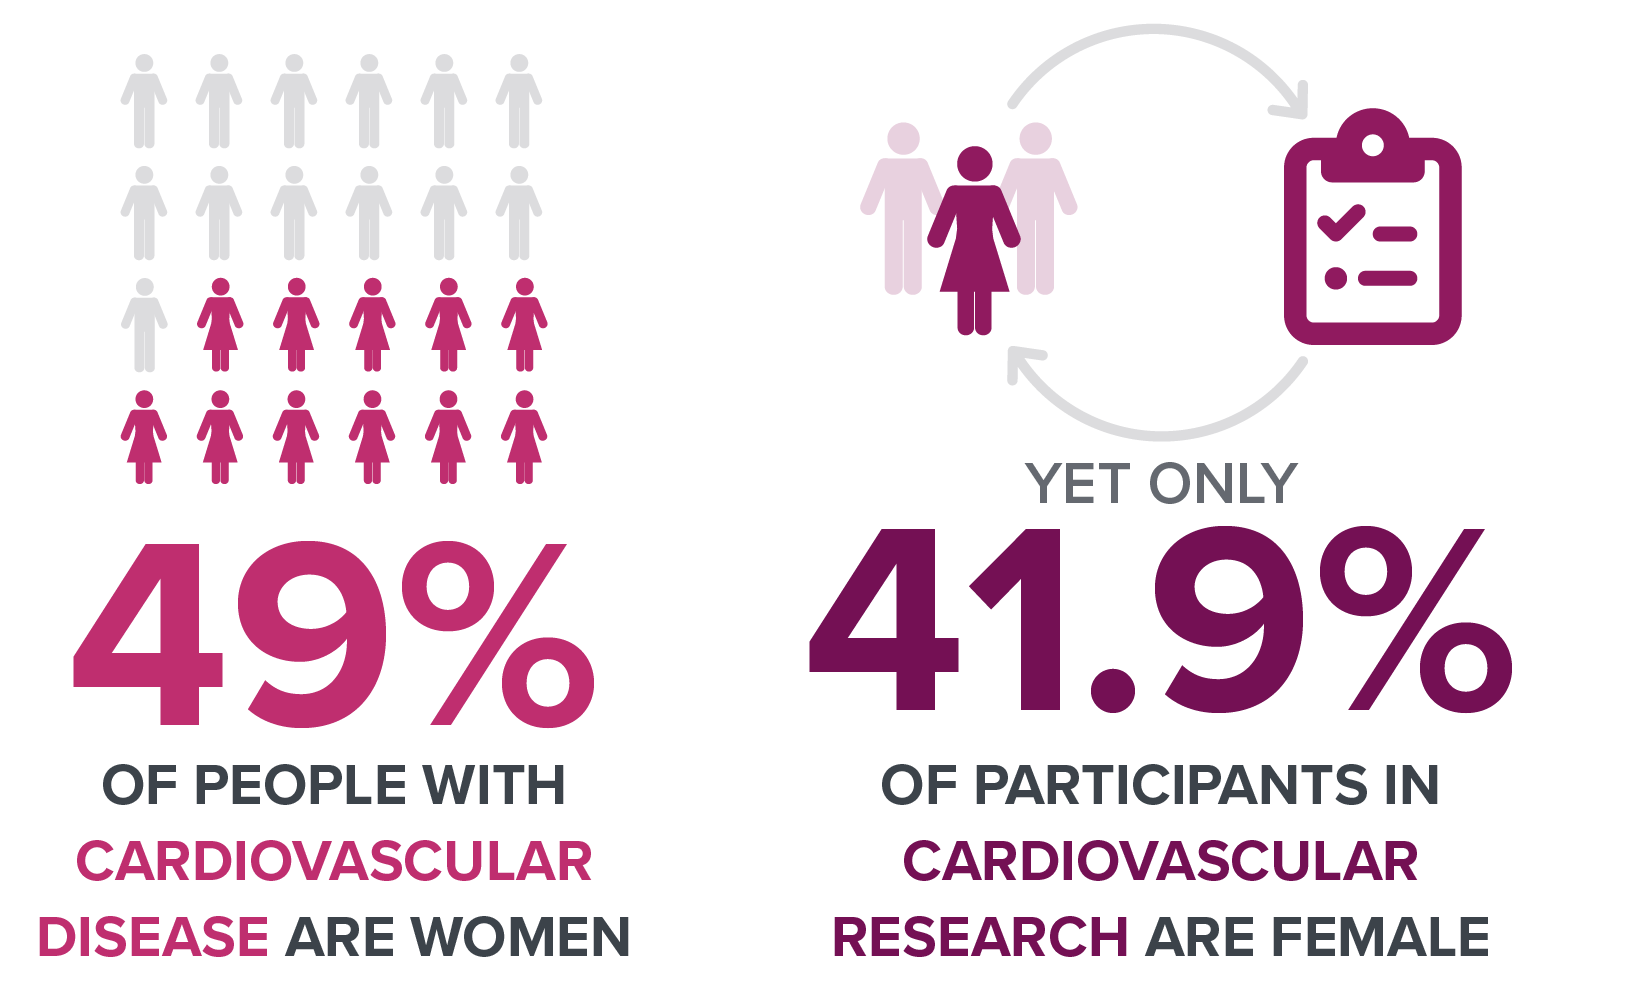 Forty-nine percent of people with cardiovascular disease are women, yet only 41.9 percent of participants in cardiovascular research are female.